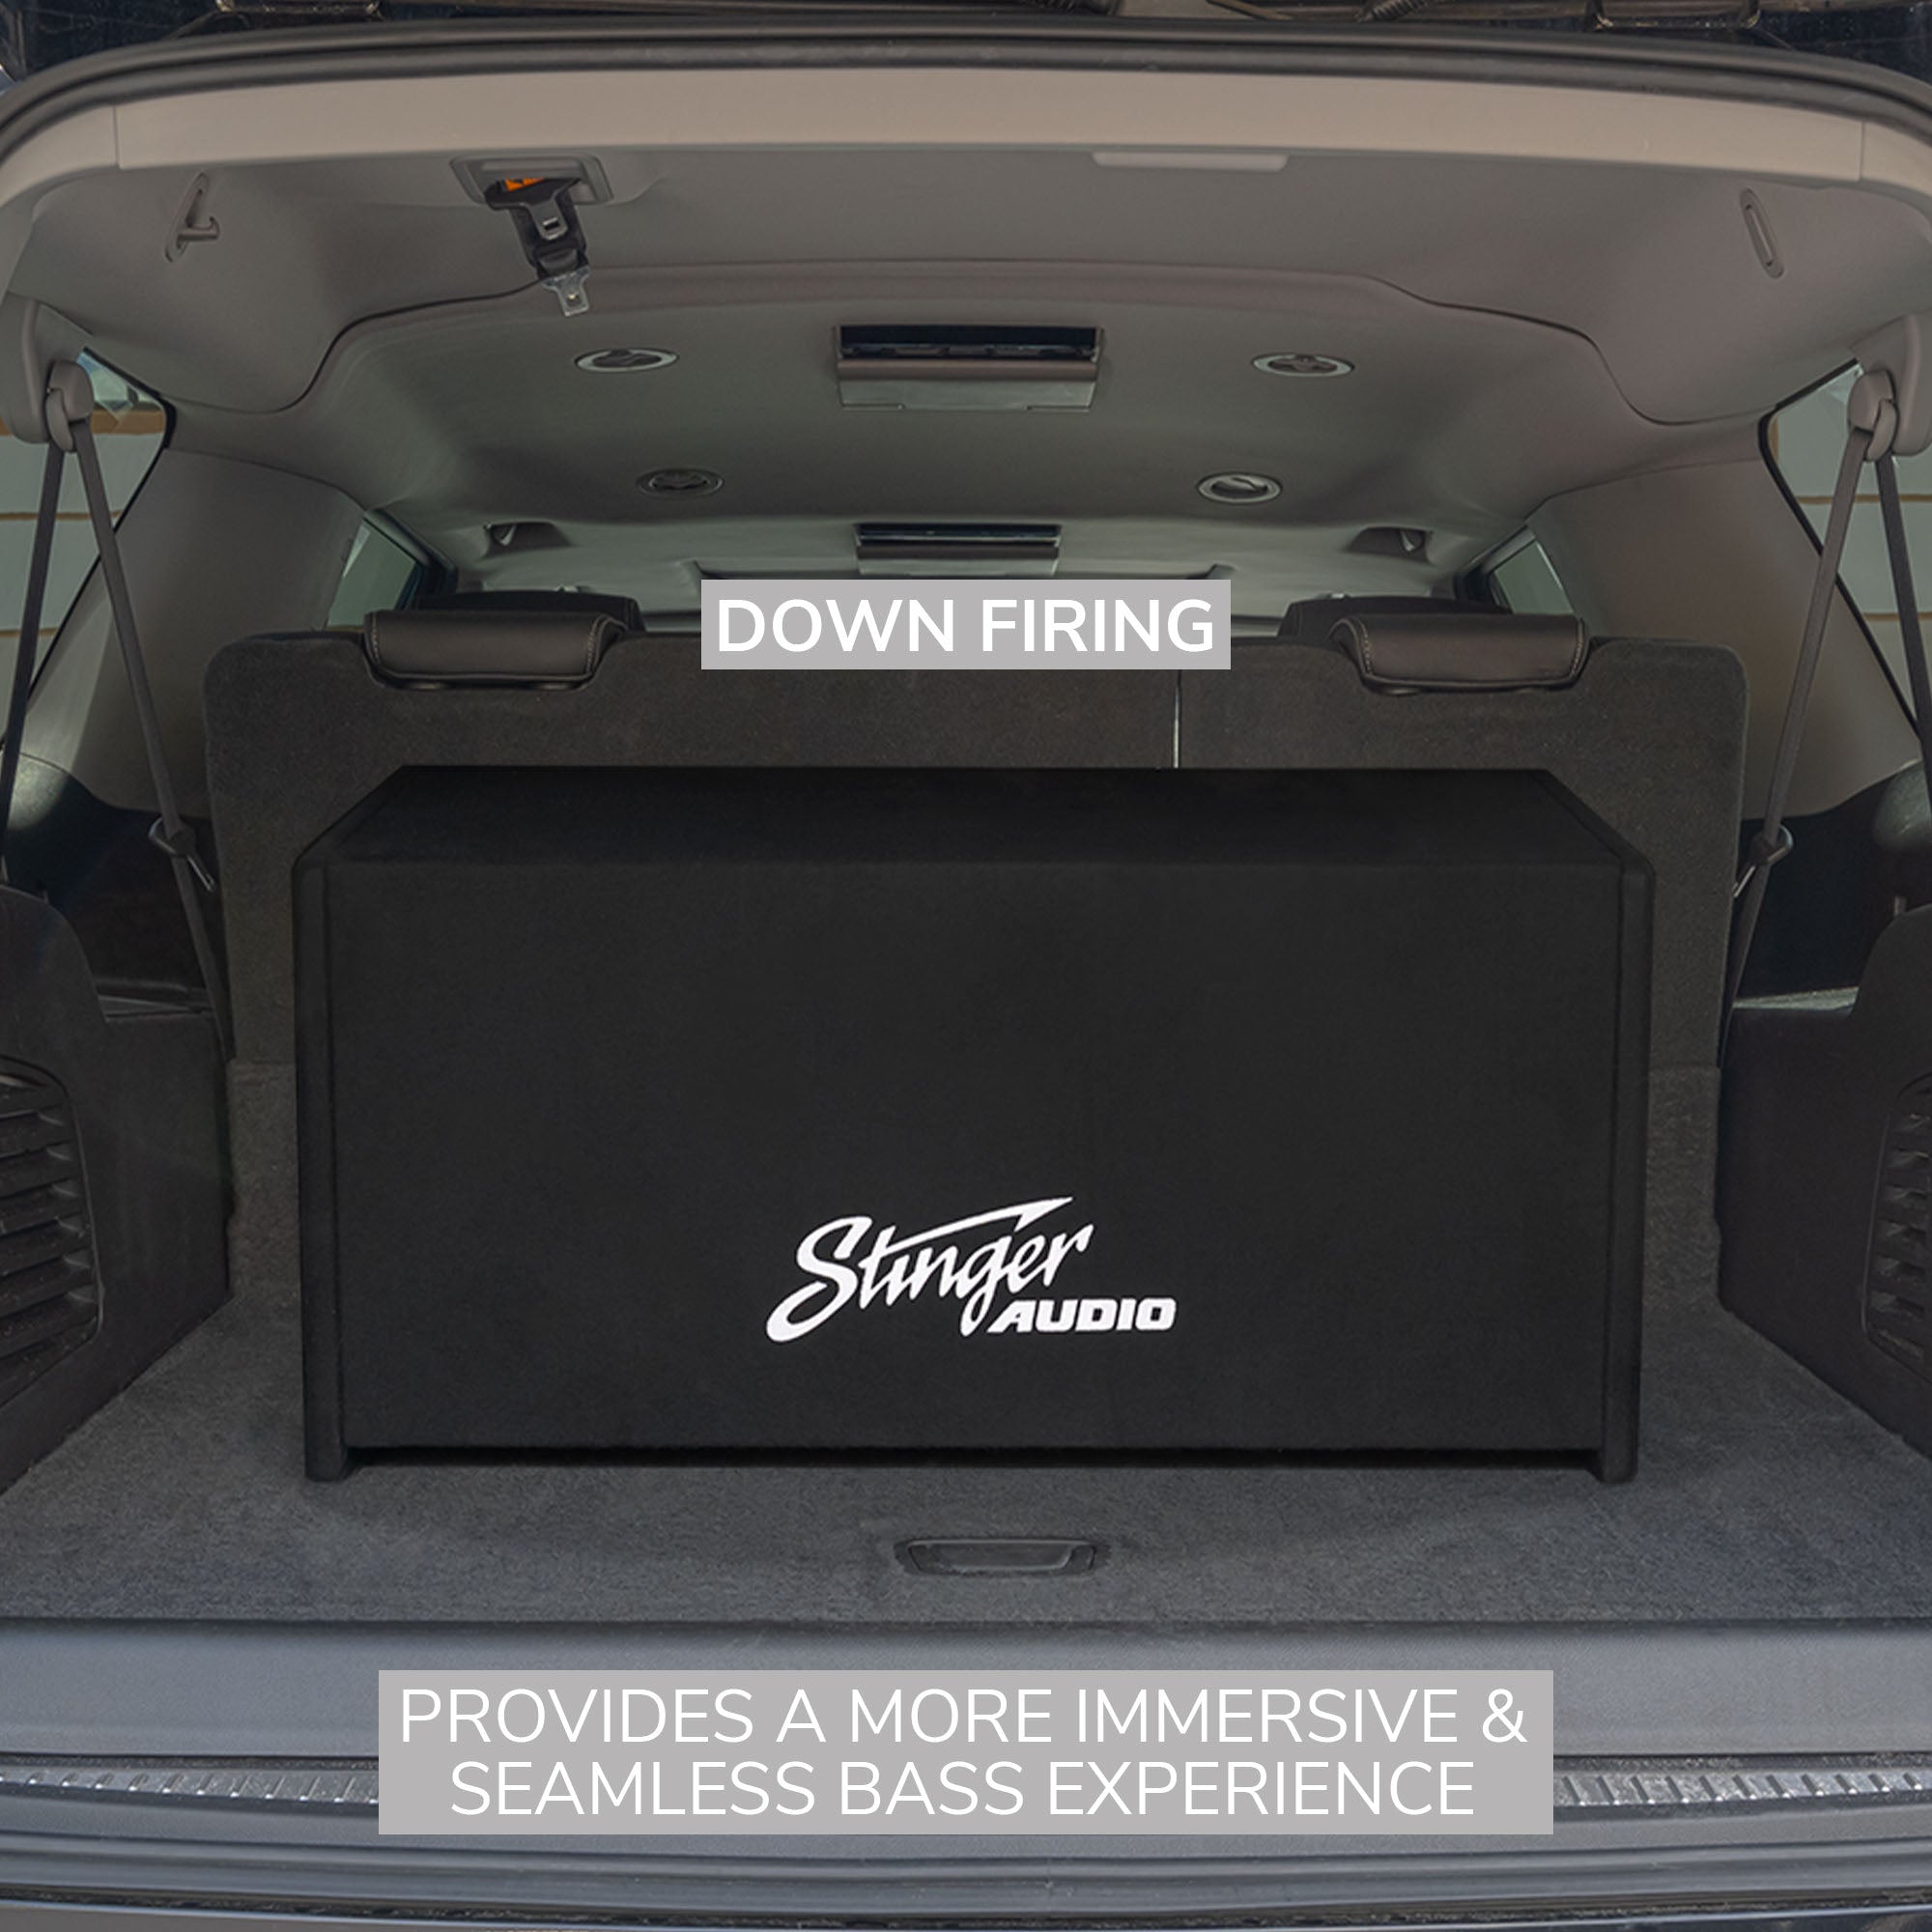 Dual 10" 1,400 Watt (RMS) Loaded Ported Subwoofer Enclosure (1,400 Watts RMS/2,400 Watts Max) Bass Package with Amplifier & Complete Wiring Kit